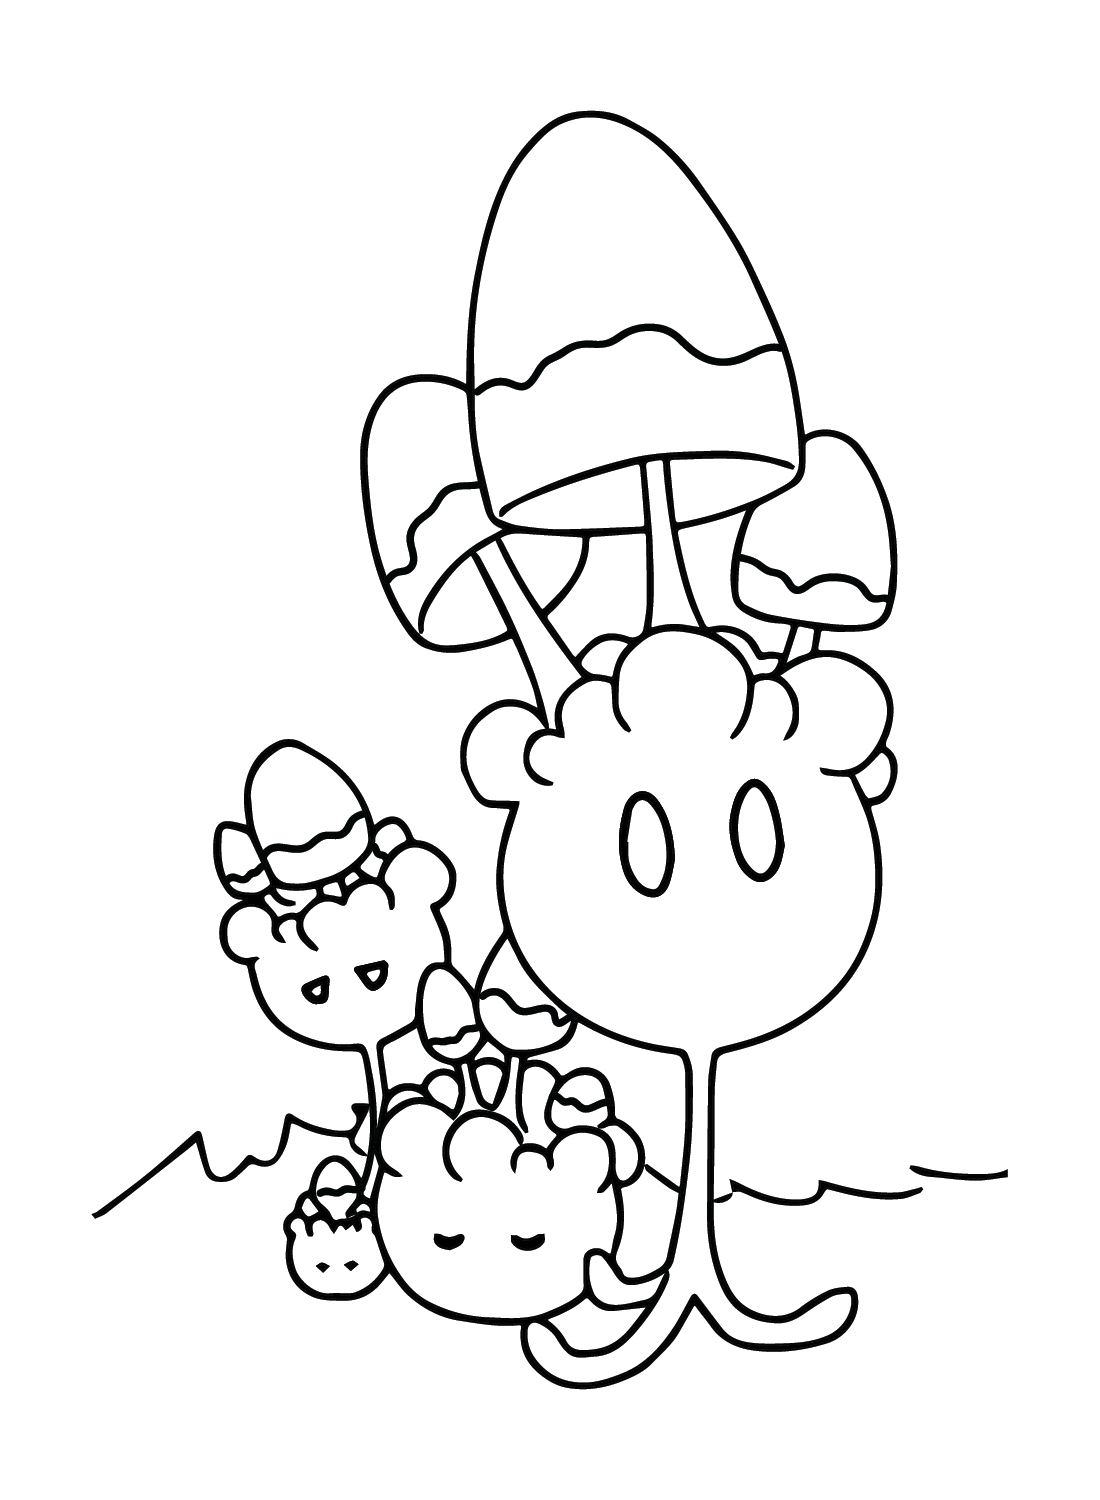 Cute Morelull Coloring Page